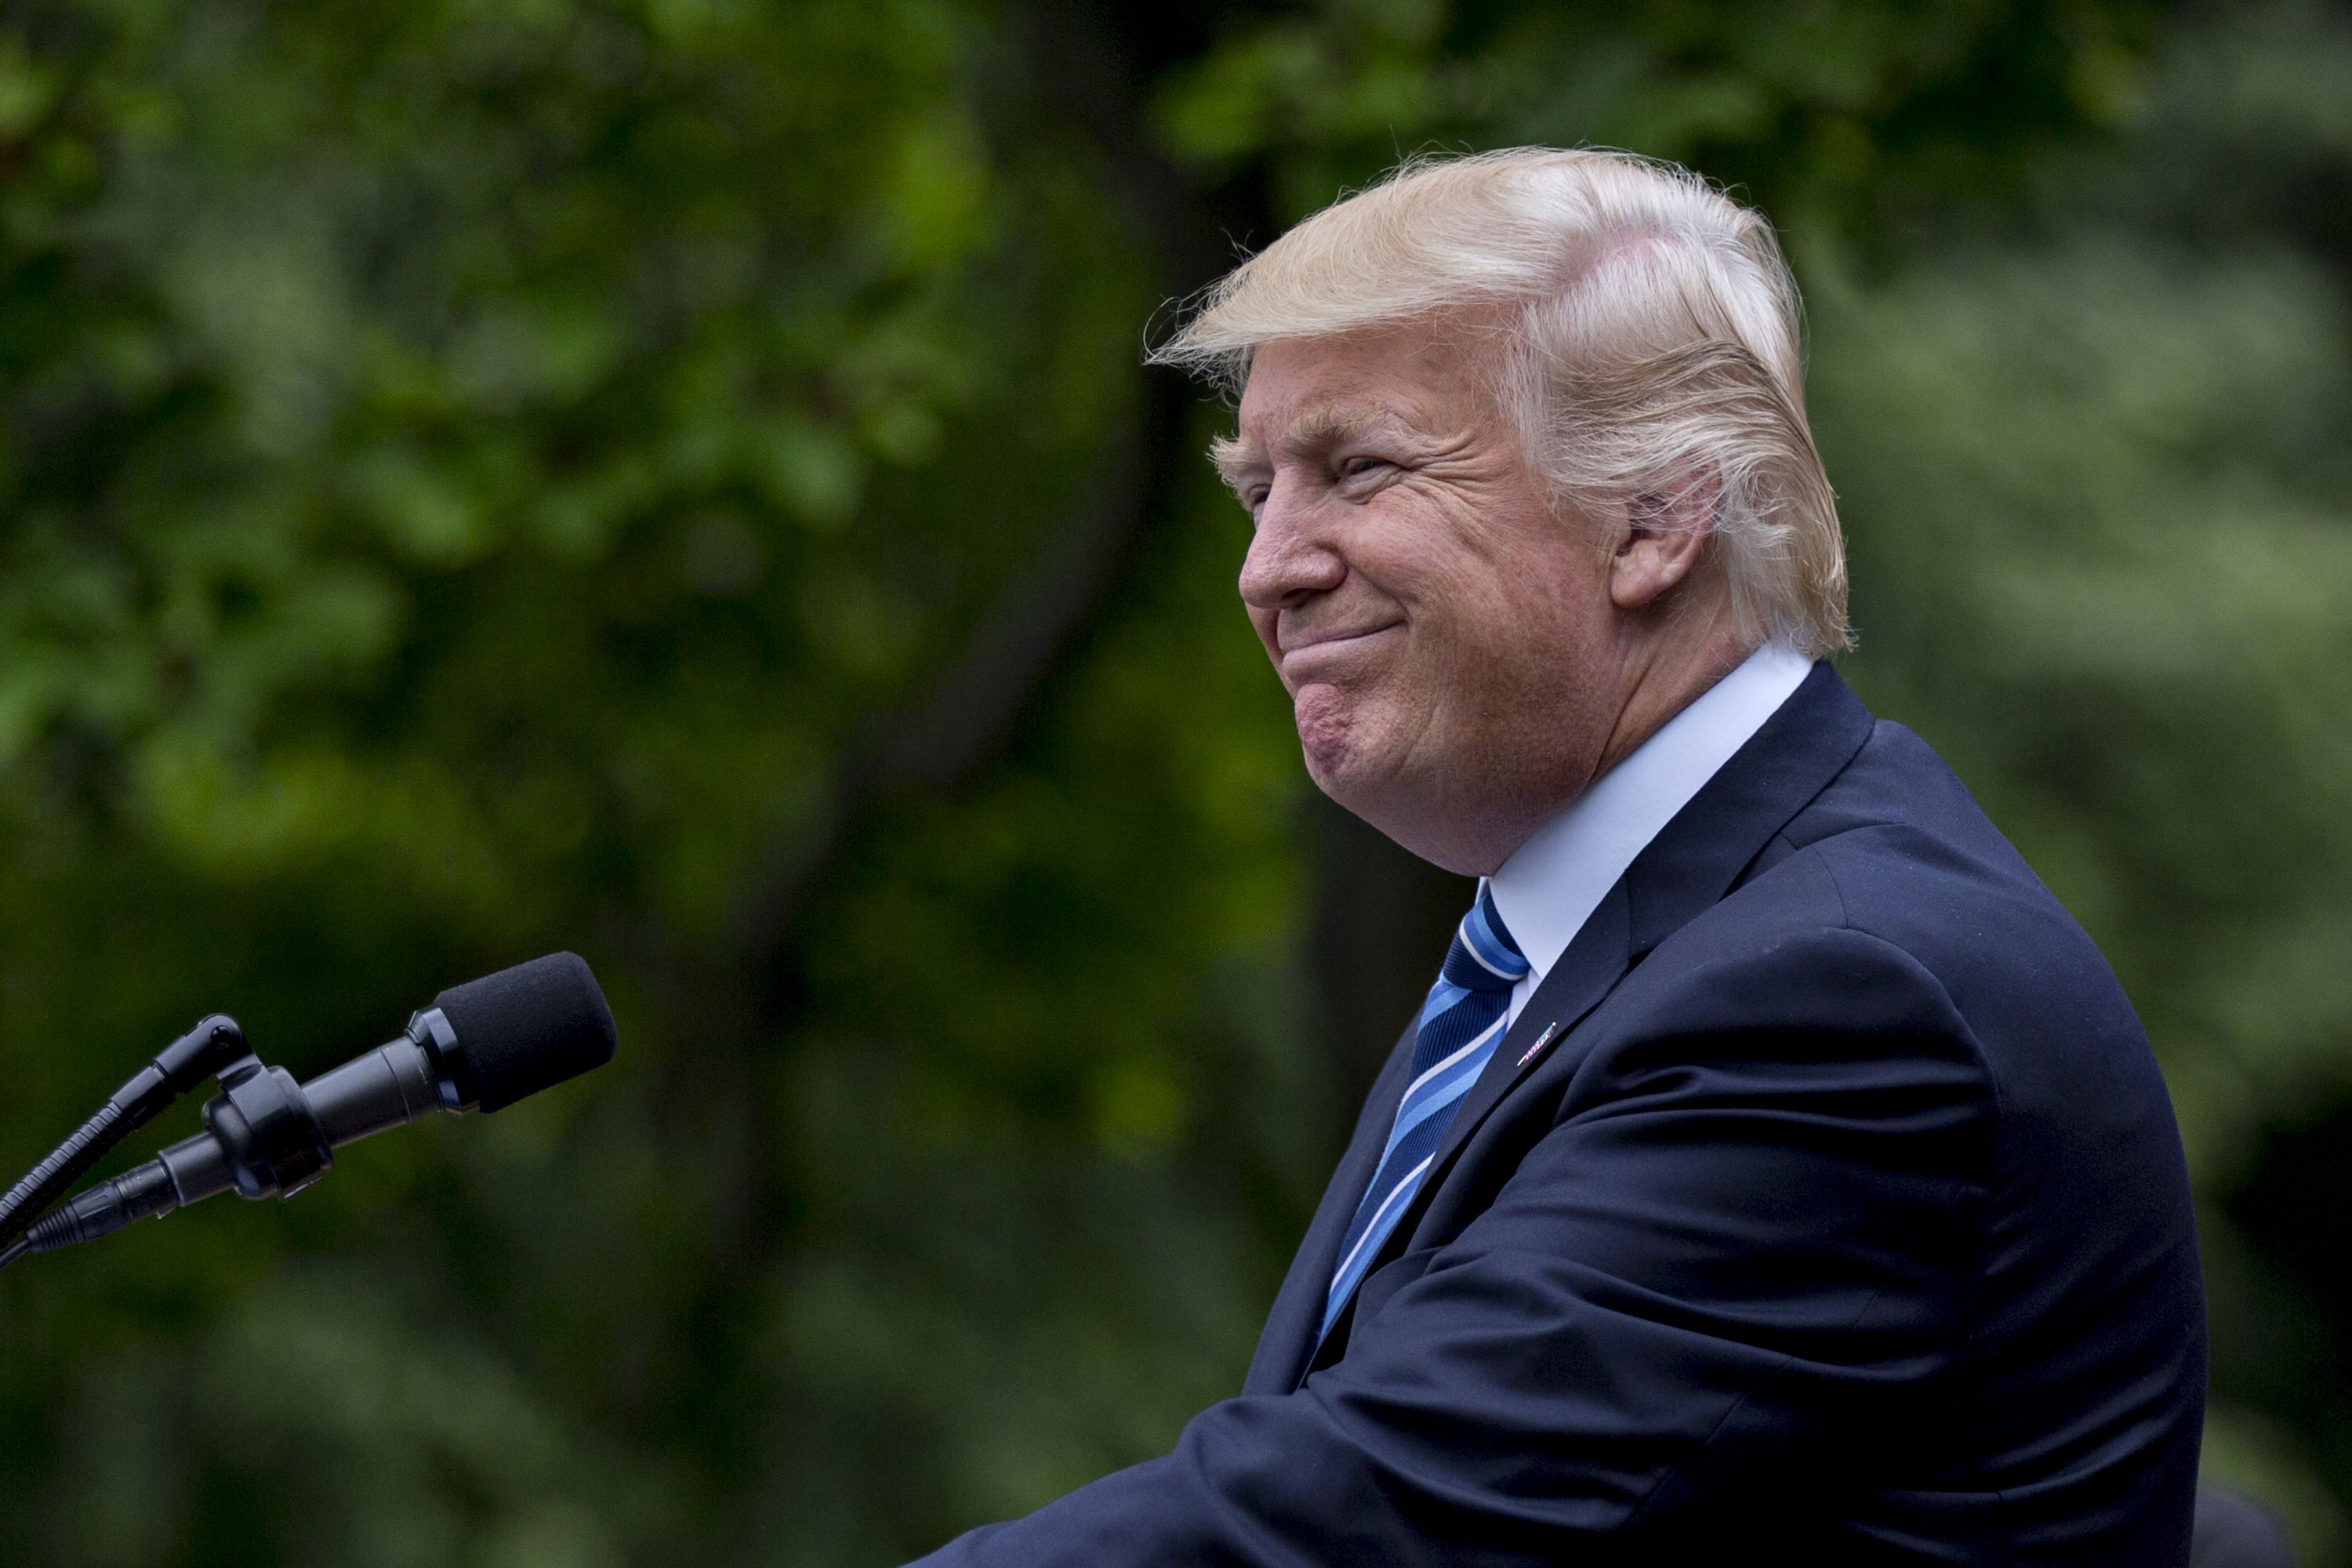 President Donald Trump smiles while speaking during a press conference in the Rose Garden of the White House on May 4, 2017. (Andrew Harrer—Bloomberg/Getty Images)